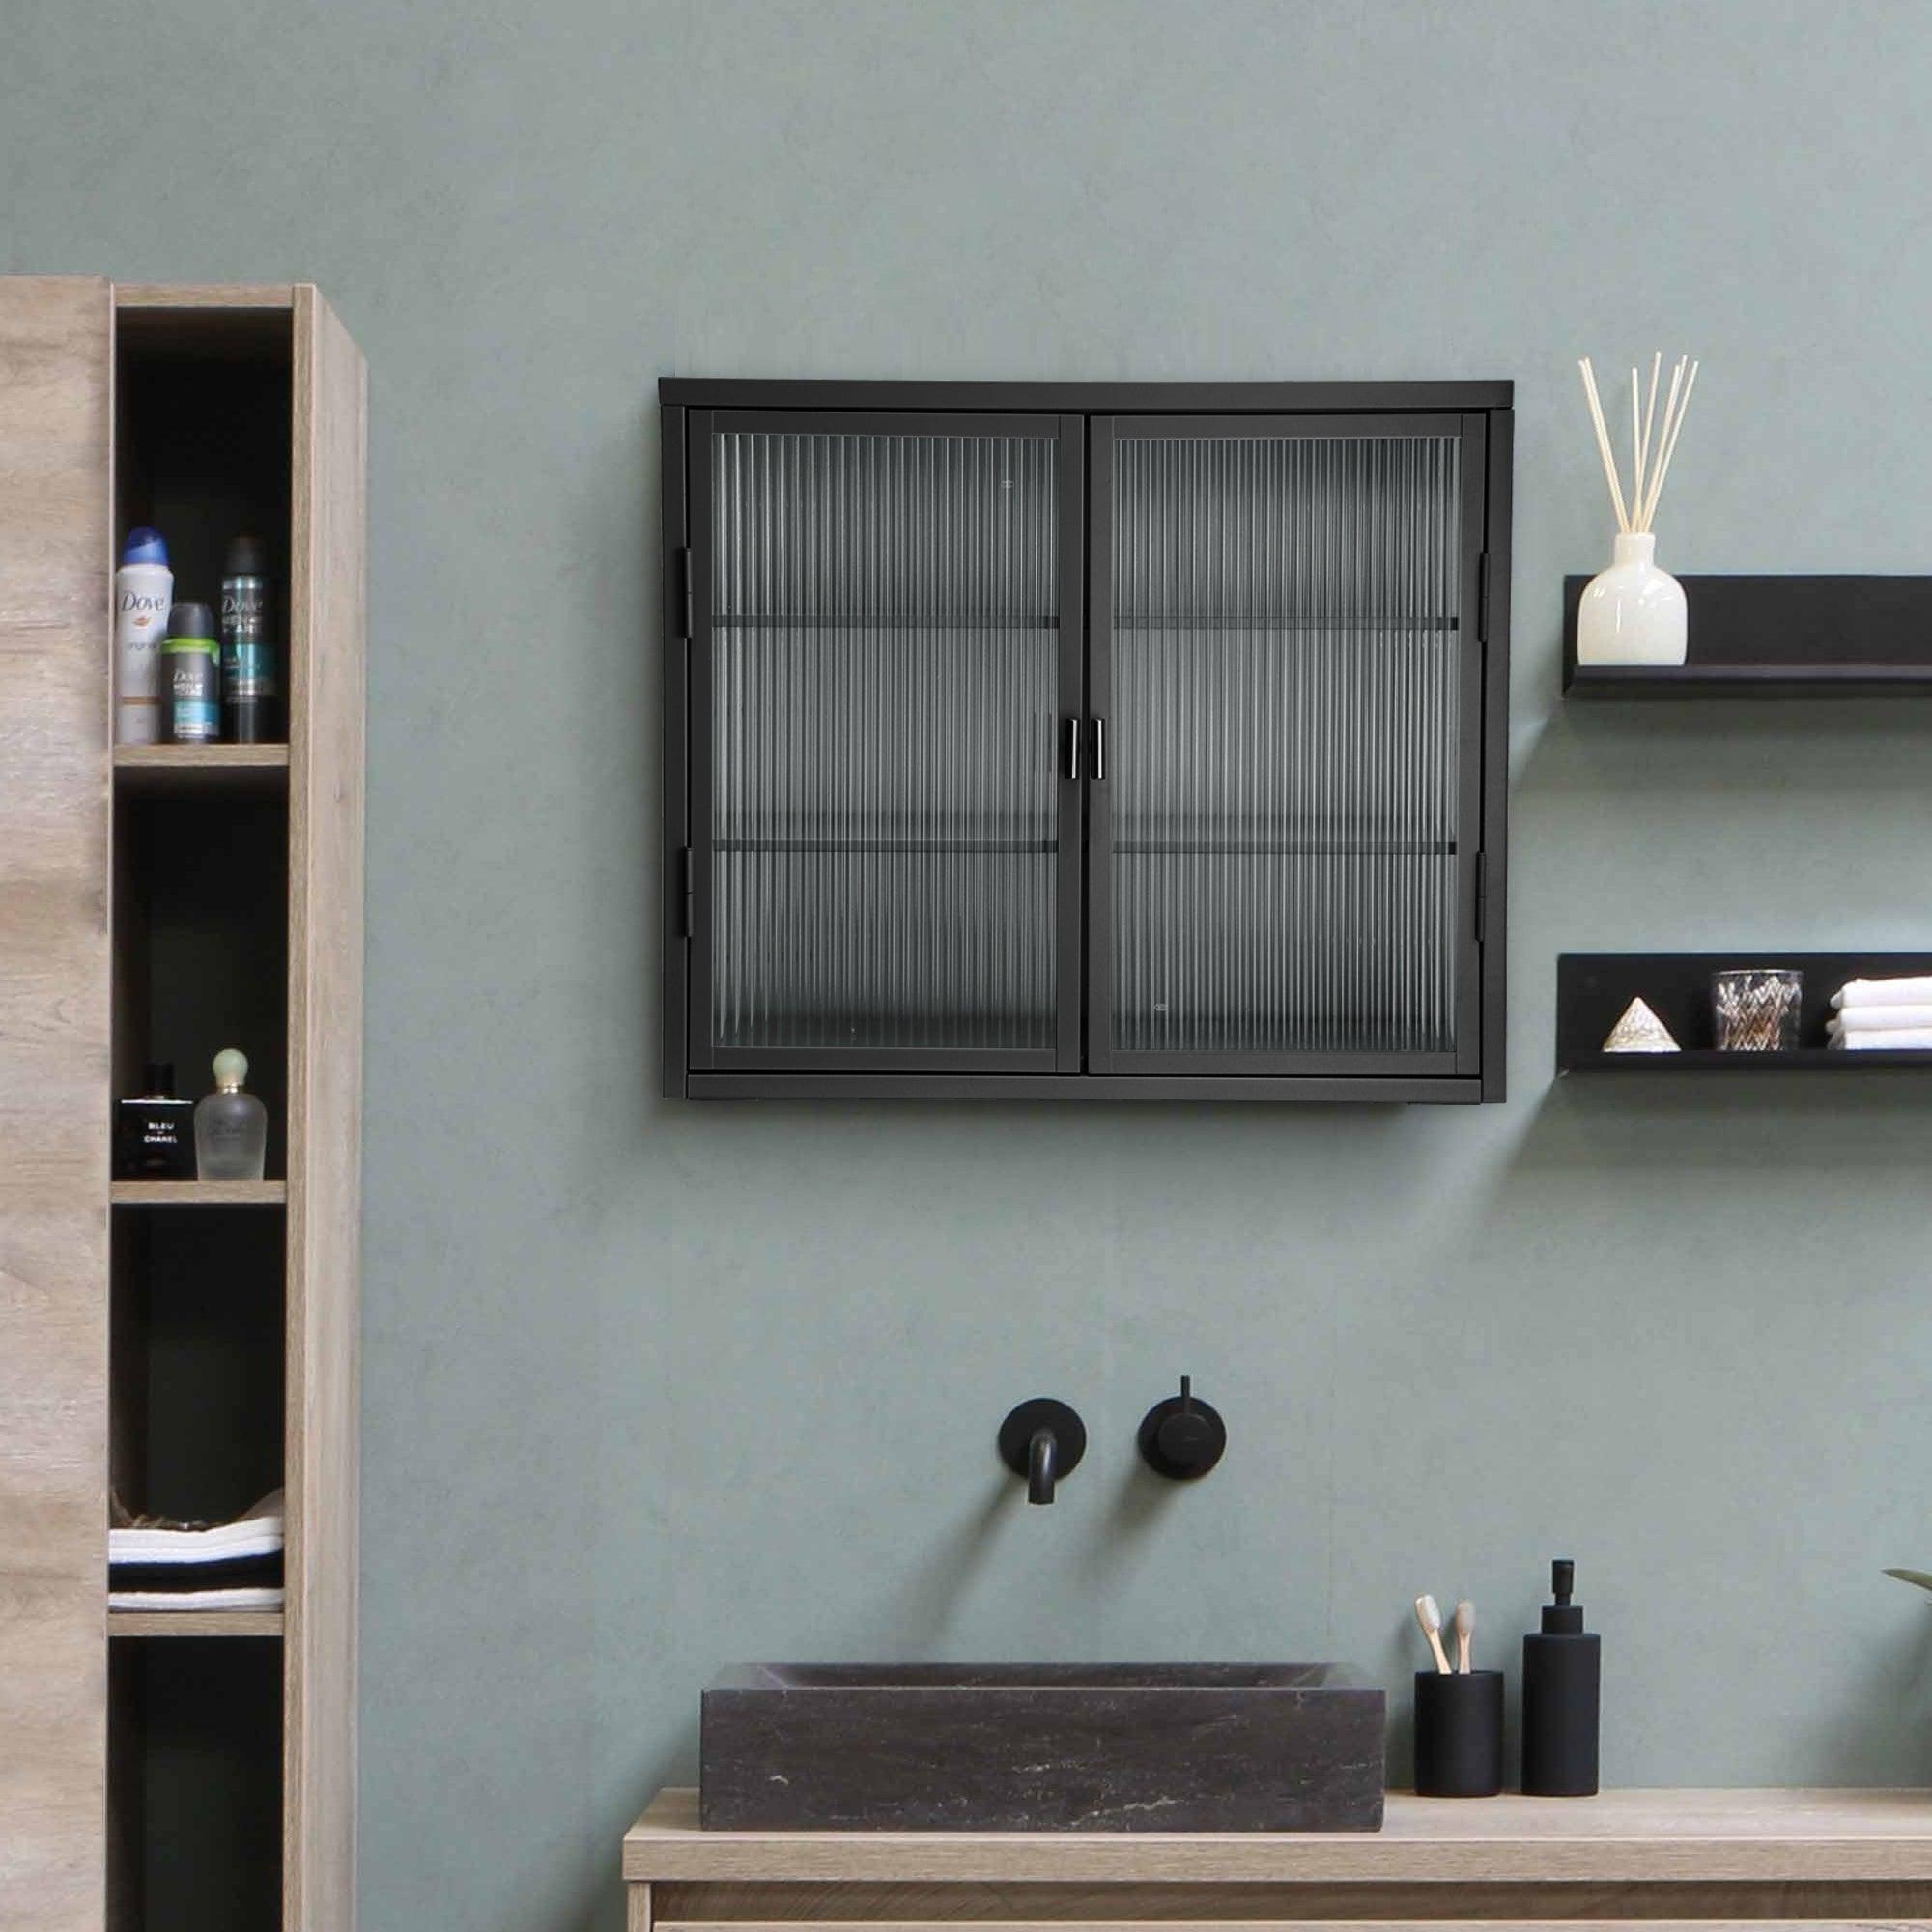 🆓🚛 Retro Style Haze Double Glass Door Wall Cabinet With Detachable Shelves for Office, Dining Room, Living Room, Kitchen & Bathroom, Black